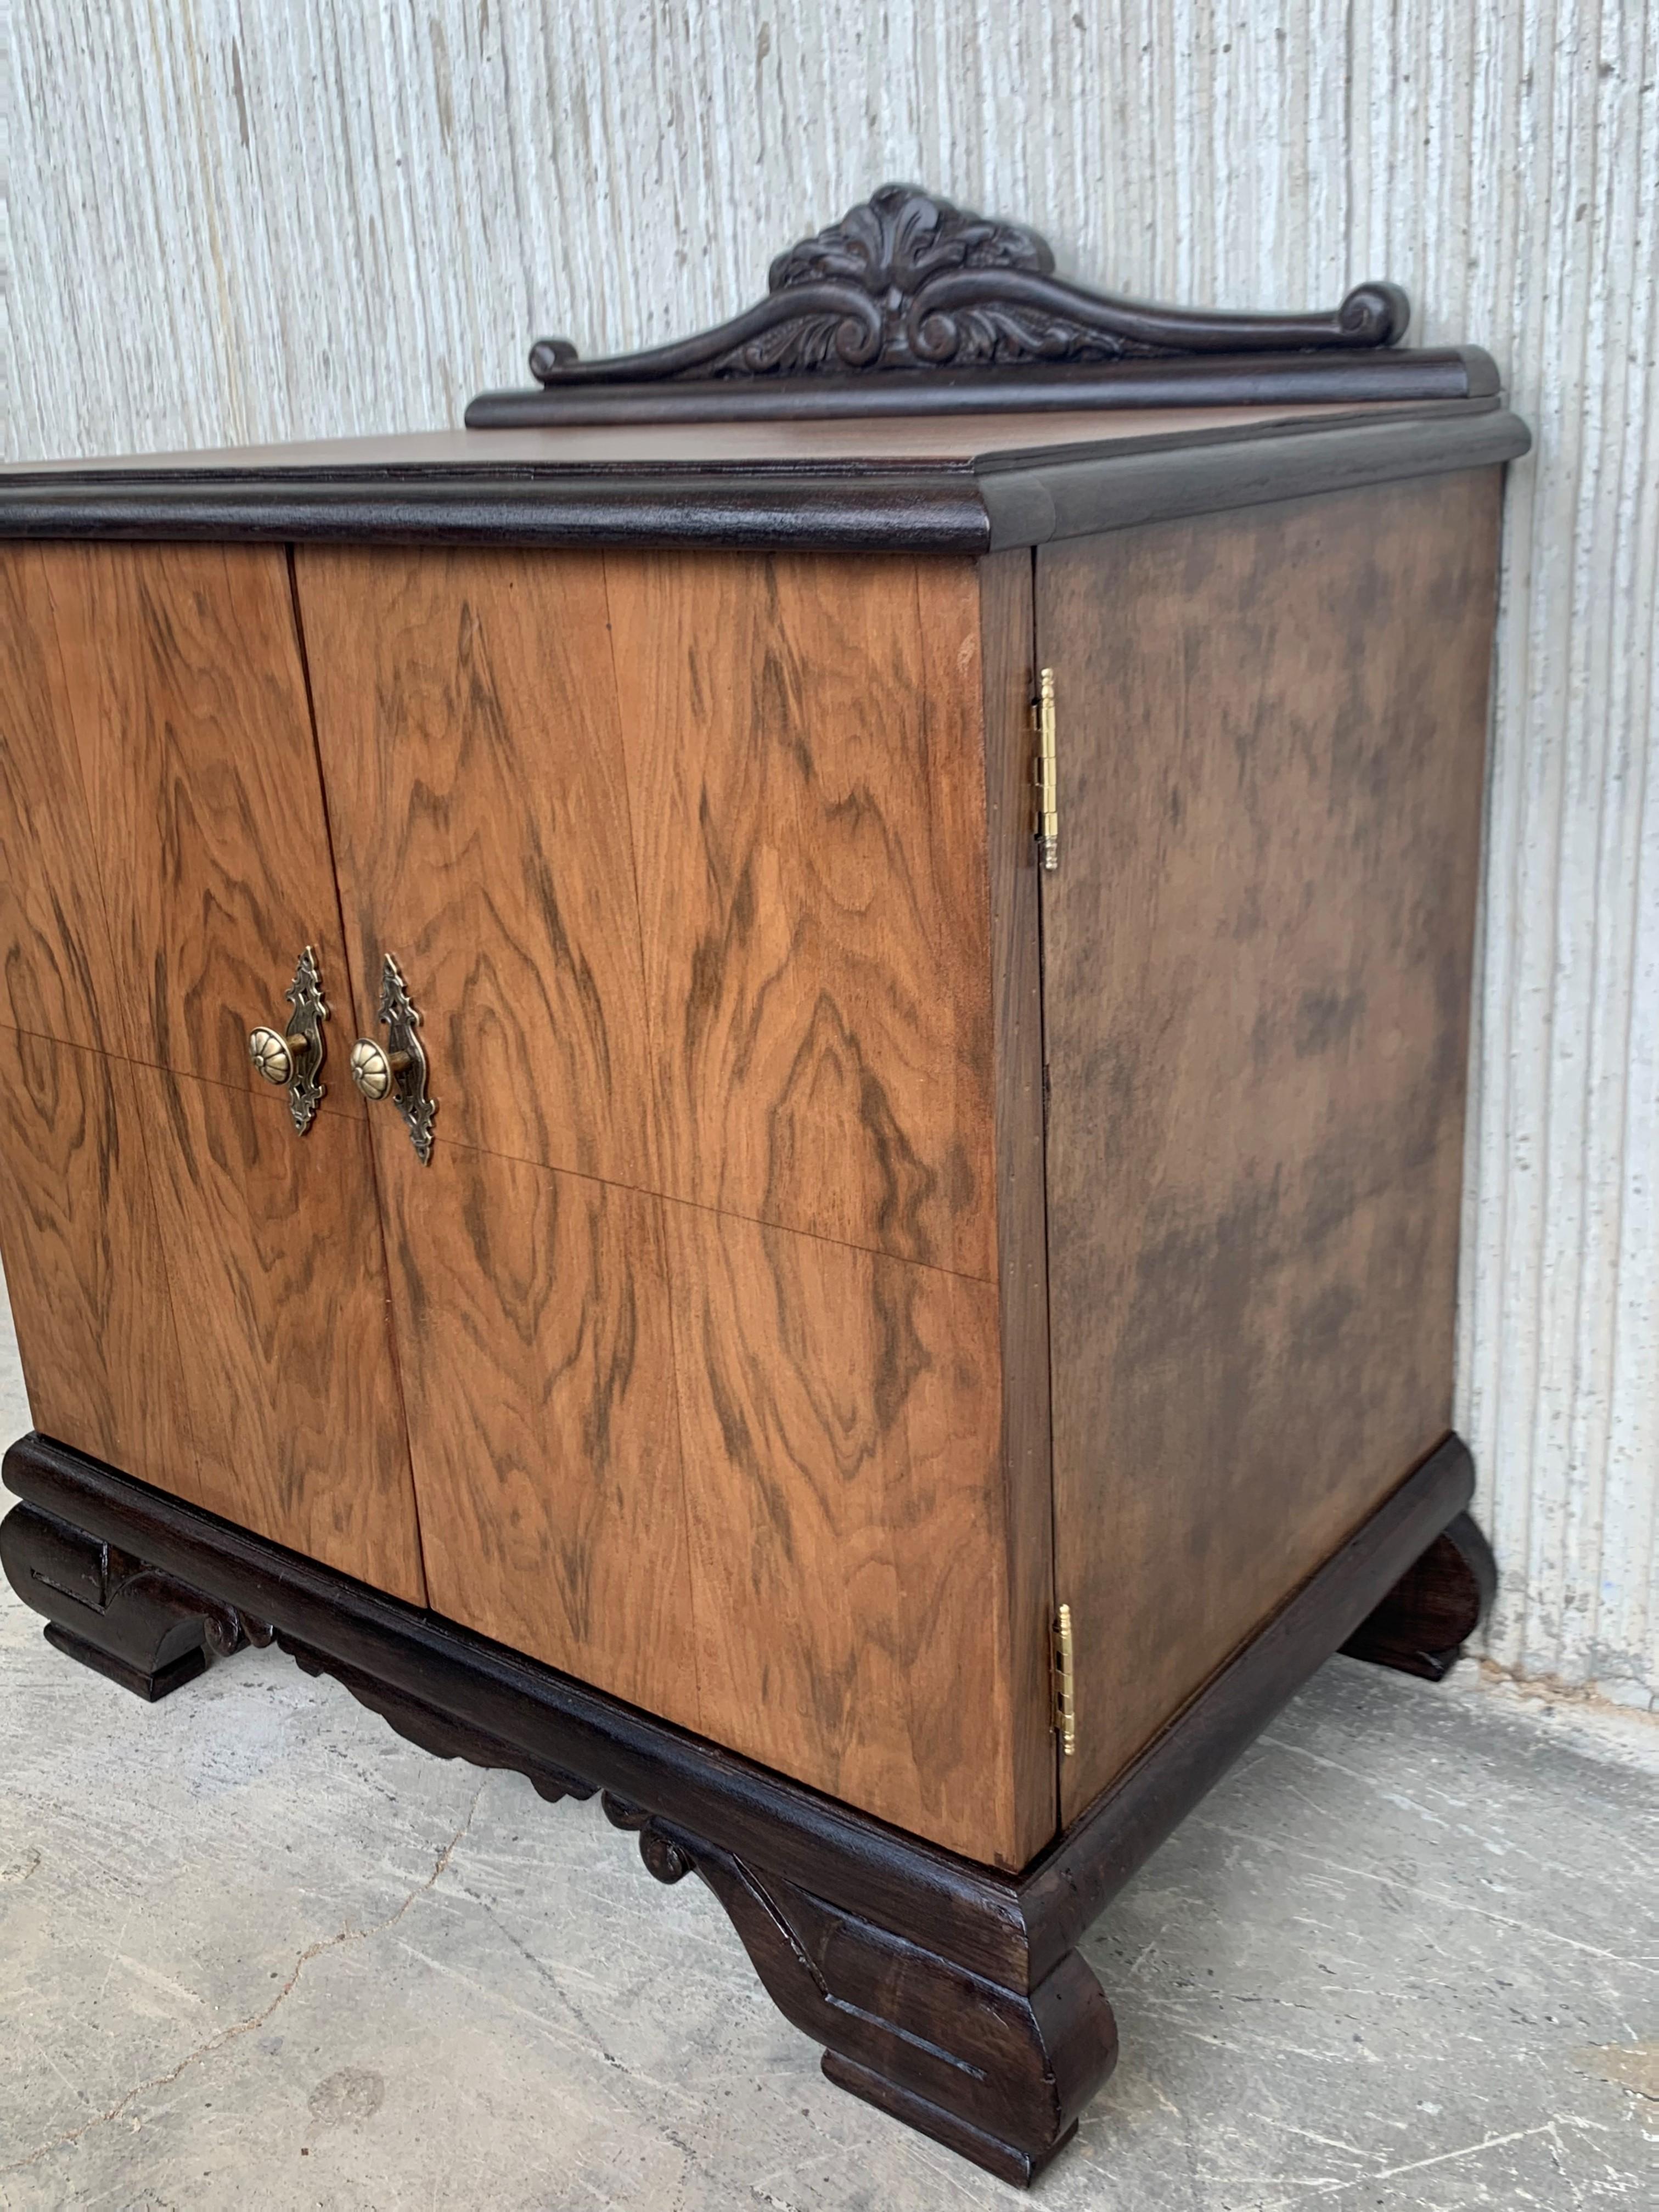 Pair of Mid-Century Modern front nightstands with original hardware and one hidden drawer.
This beautiful pair of vintage modern nightstands feature two cabinet doors that open to unveil a large compartment for storage. Sleek straight line design